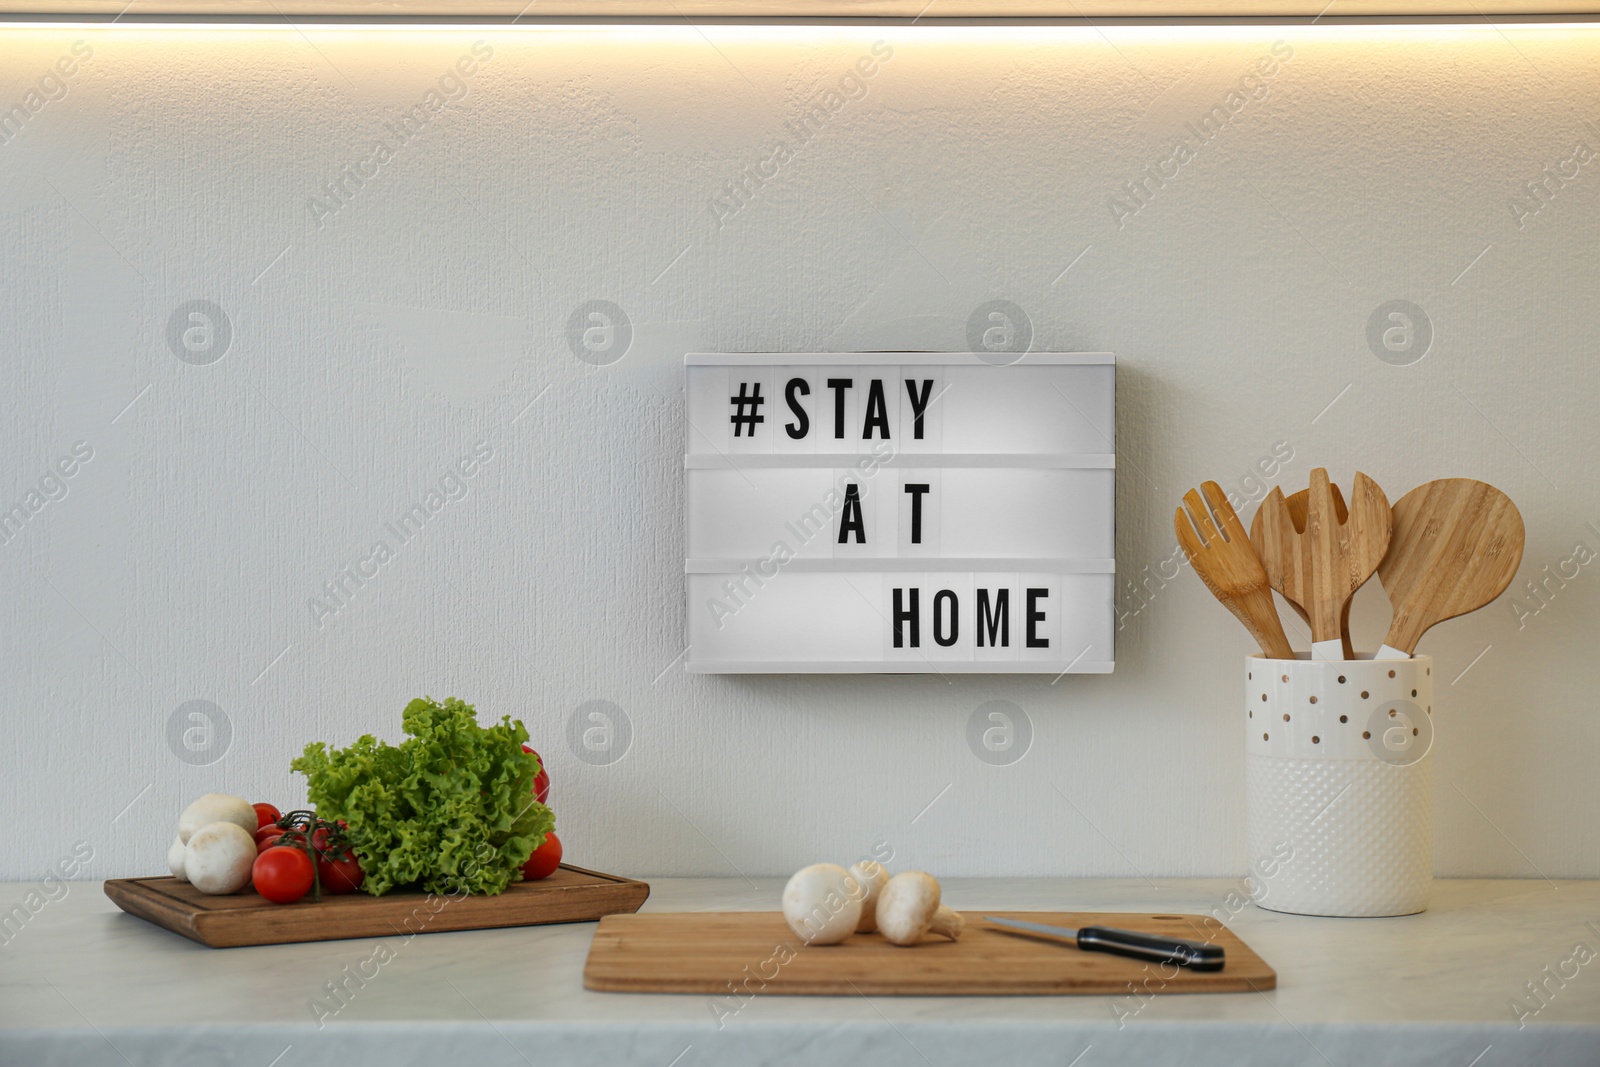 Photo of Fresh products, cooking utensils and lightbox with hashtag STAY AT HOME in kitchen. Message to promote self-isolation during COVID‑19 pandemic